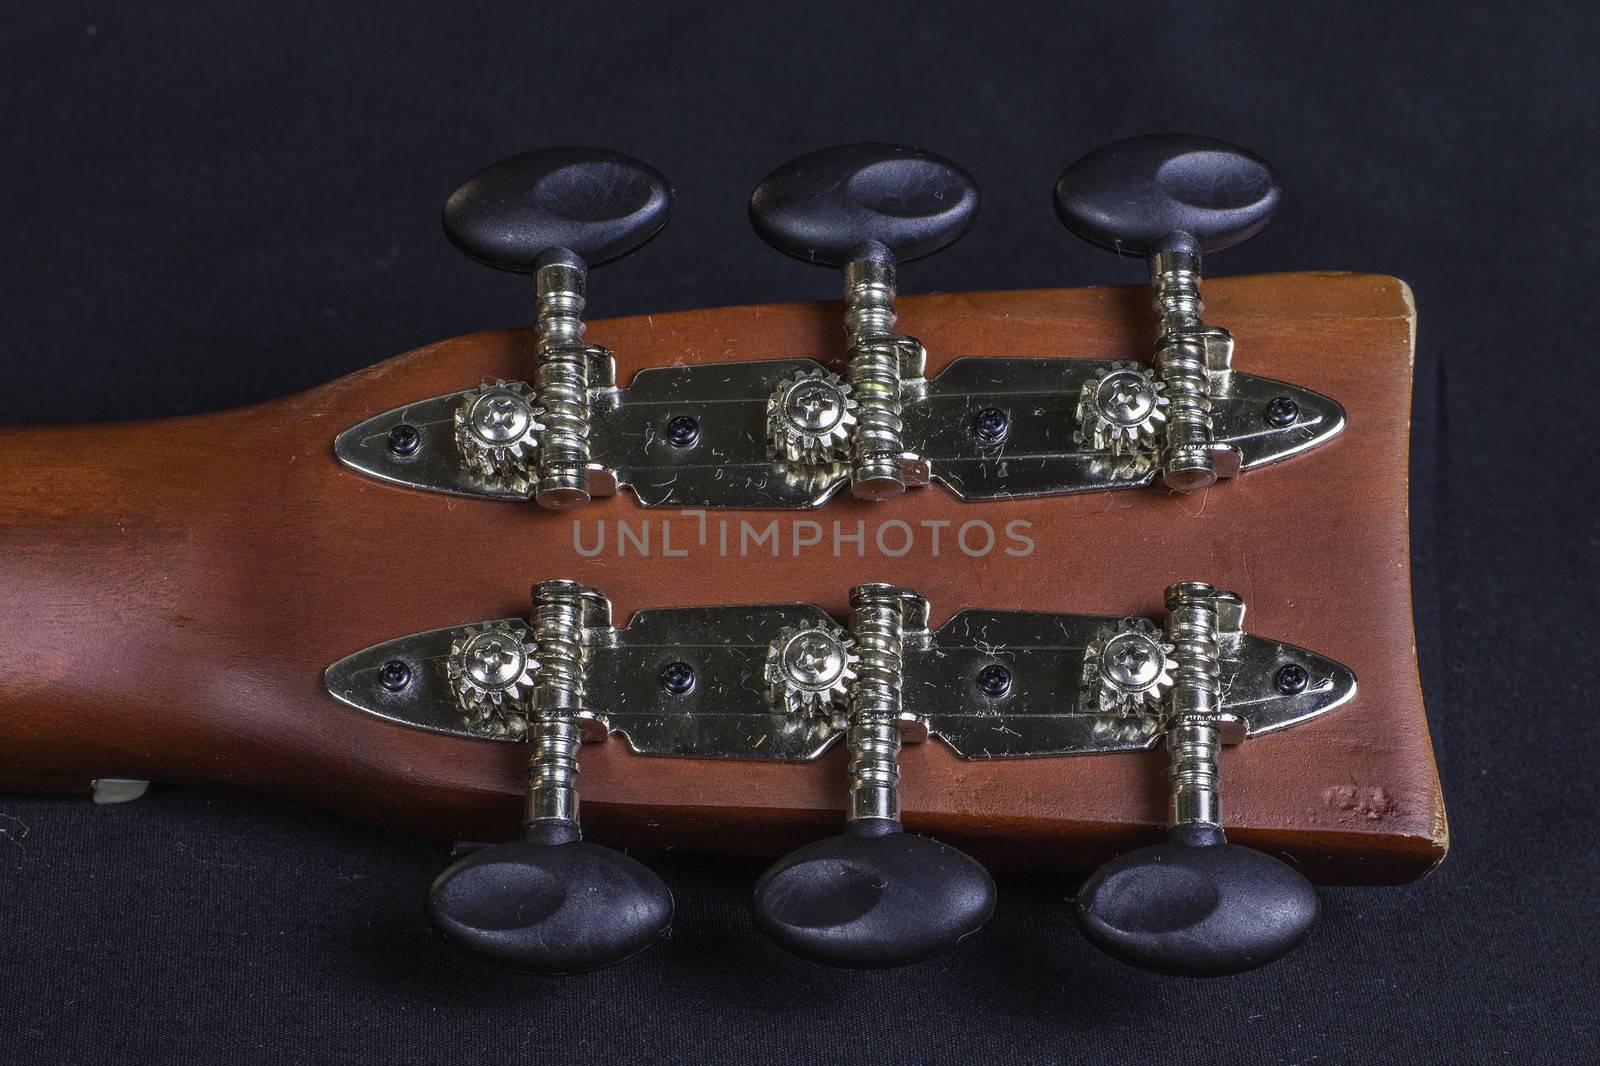 The handle of a classical guitar showing the gears and knobs.